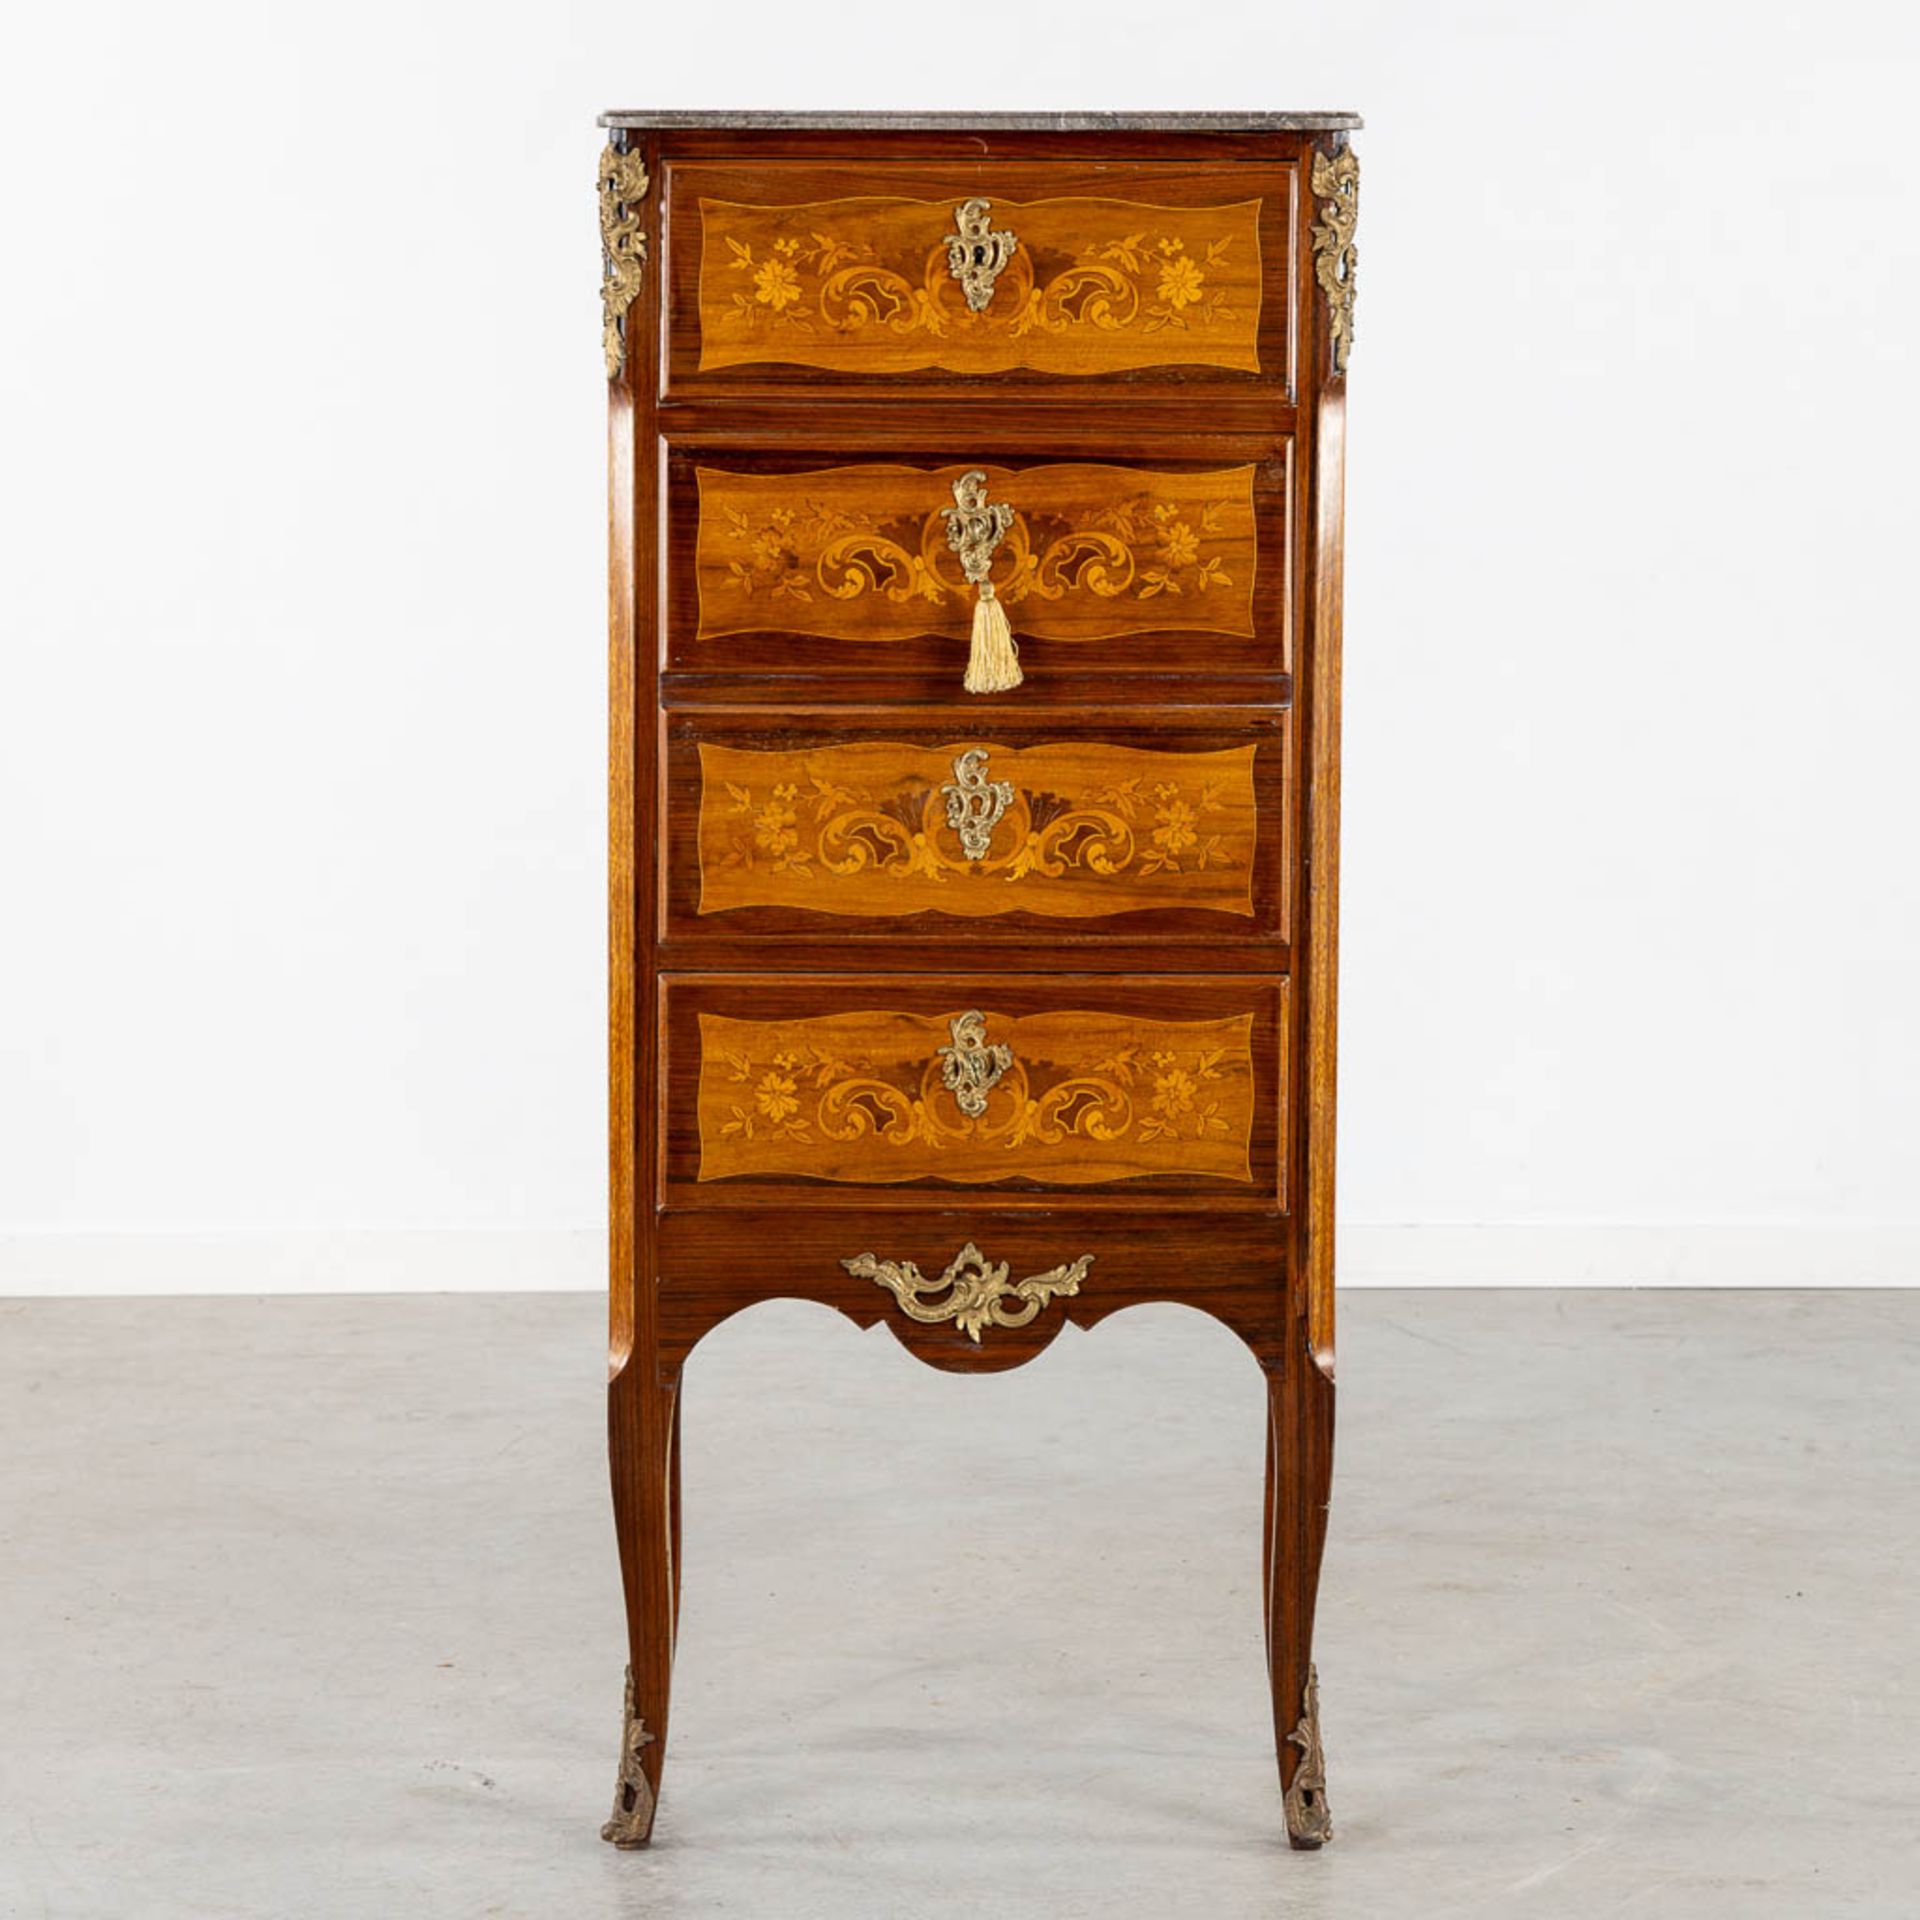 A Secretaire cabinet, Marquetry inlay and mounted with bronze. Circa 1900. (L:34 x W:56 x H:128 cm) - Bild 6 aus 15